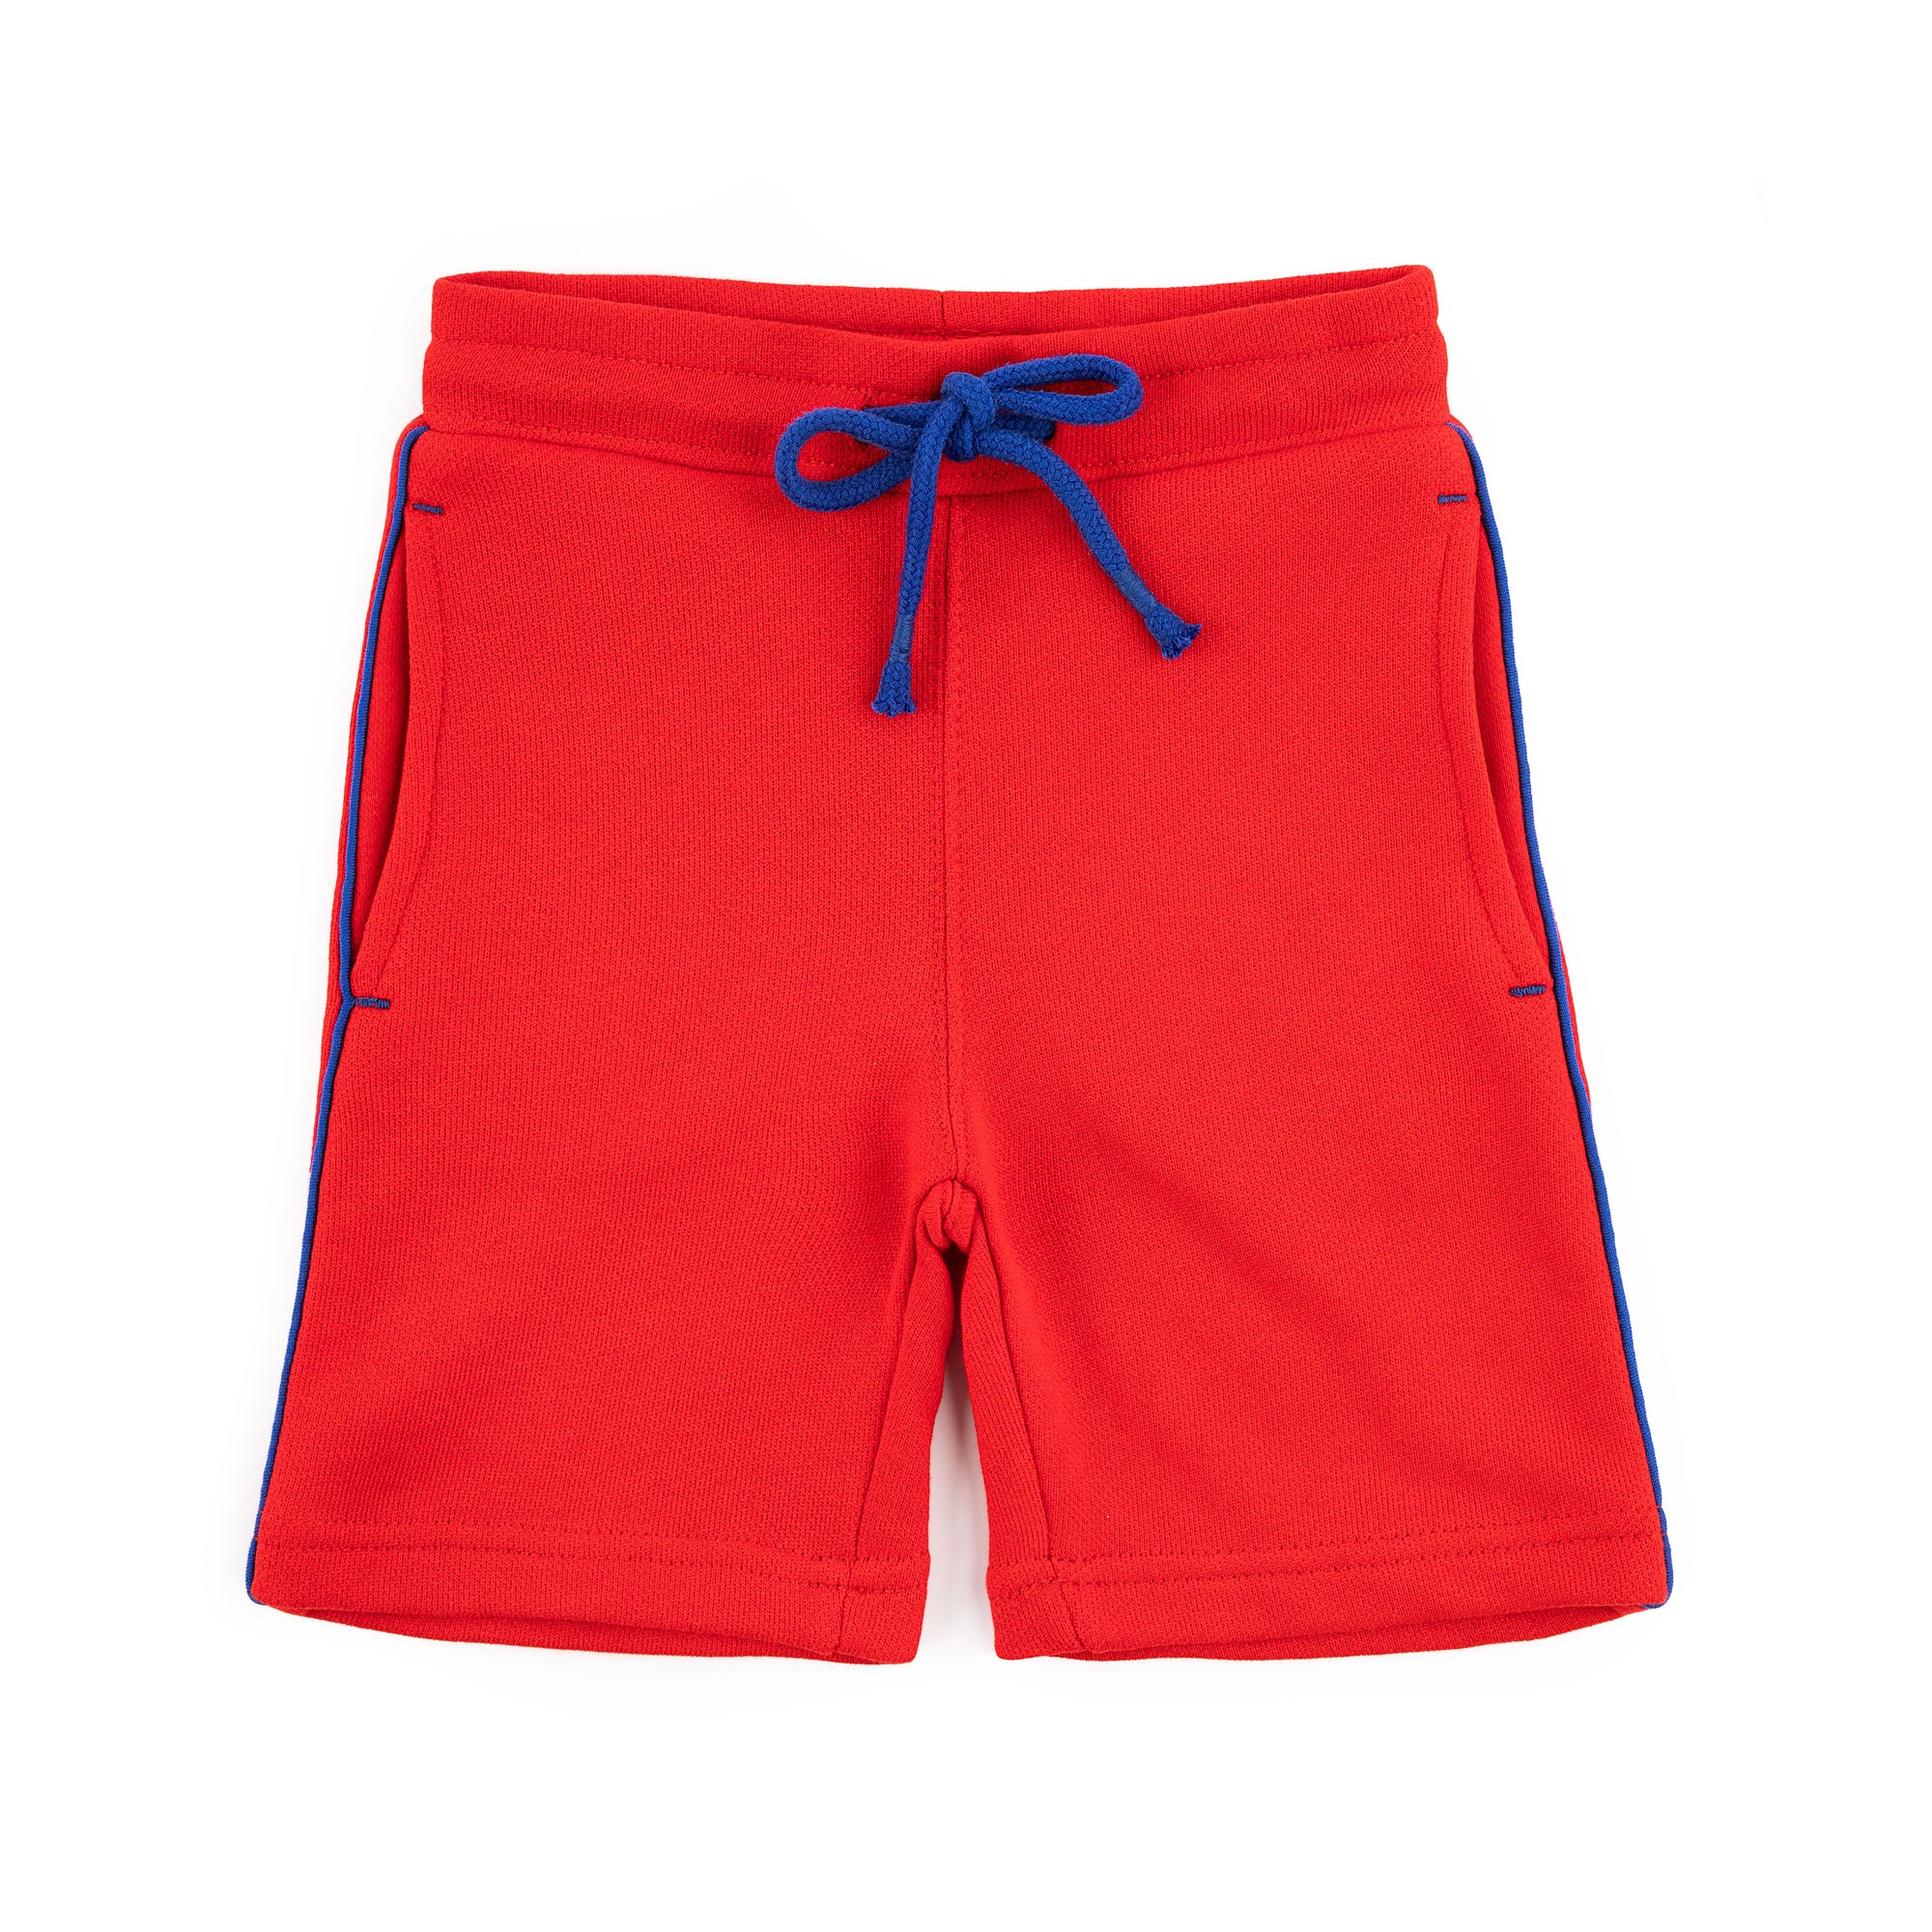 Plain Red Shorts – cocobee